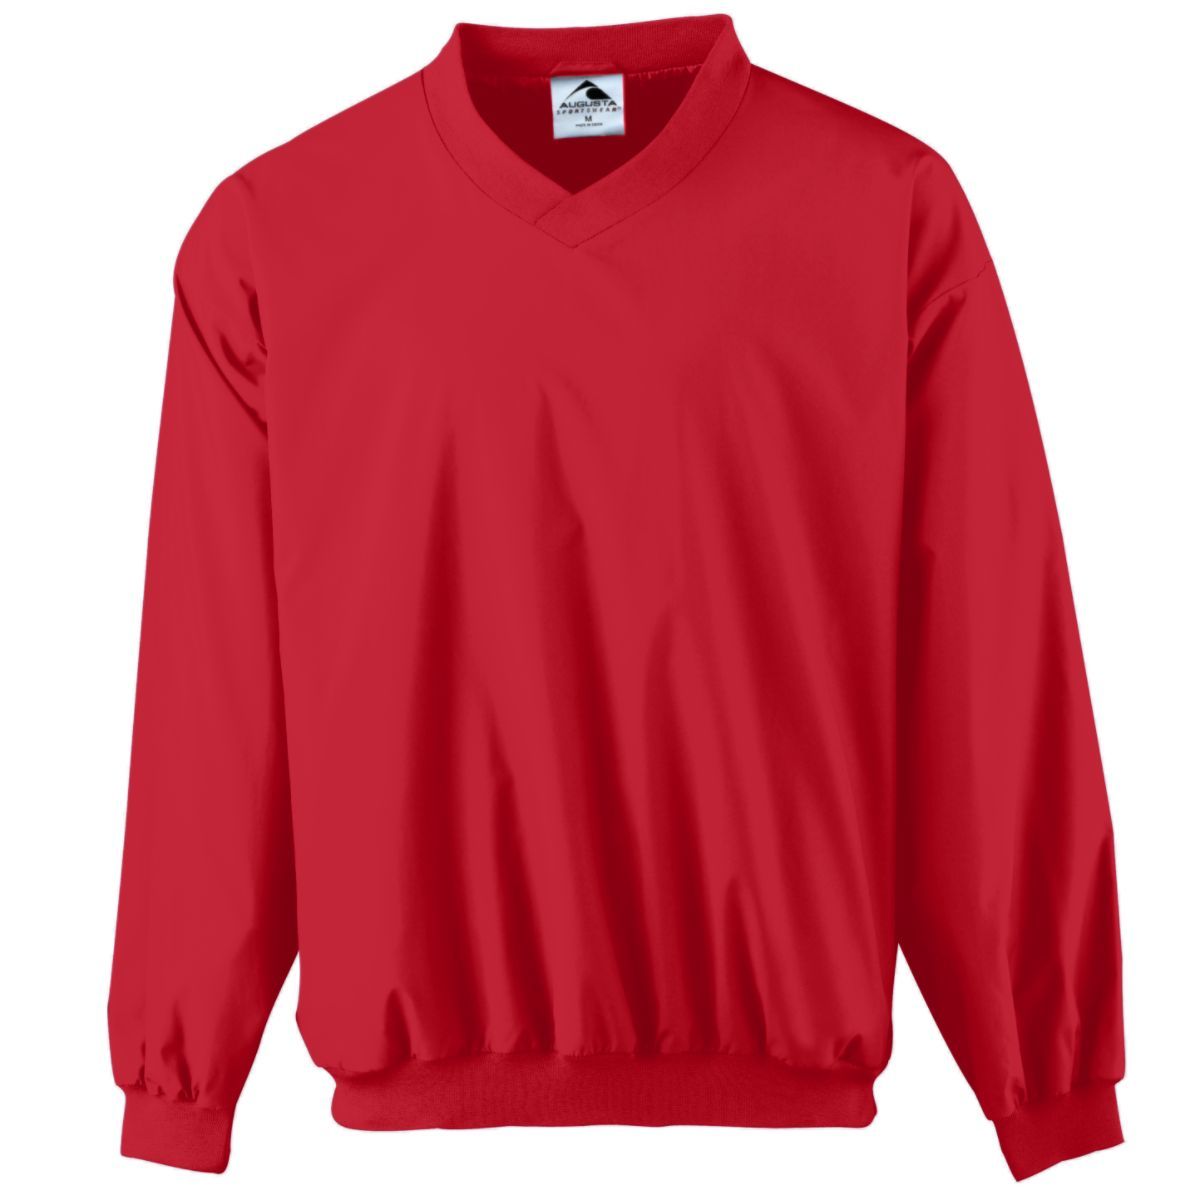 Augusta Sportswear Micro Poly Windshirt/Lined in Red  -Part of the Adult, Adult-Jacket, Augusta-Products, Outerwear product lines at KanaleyCreations.com